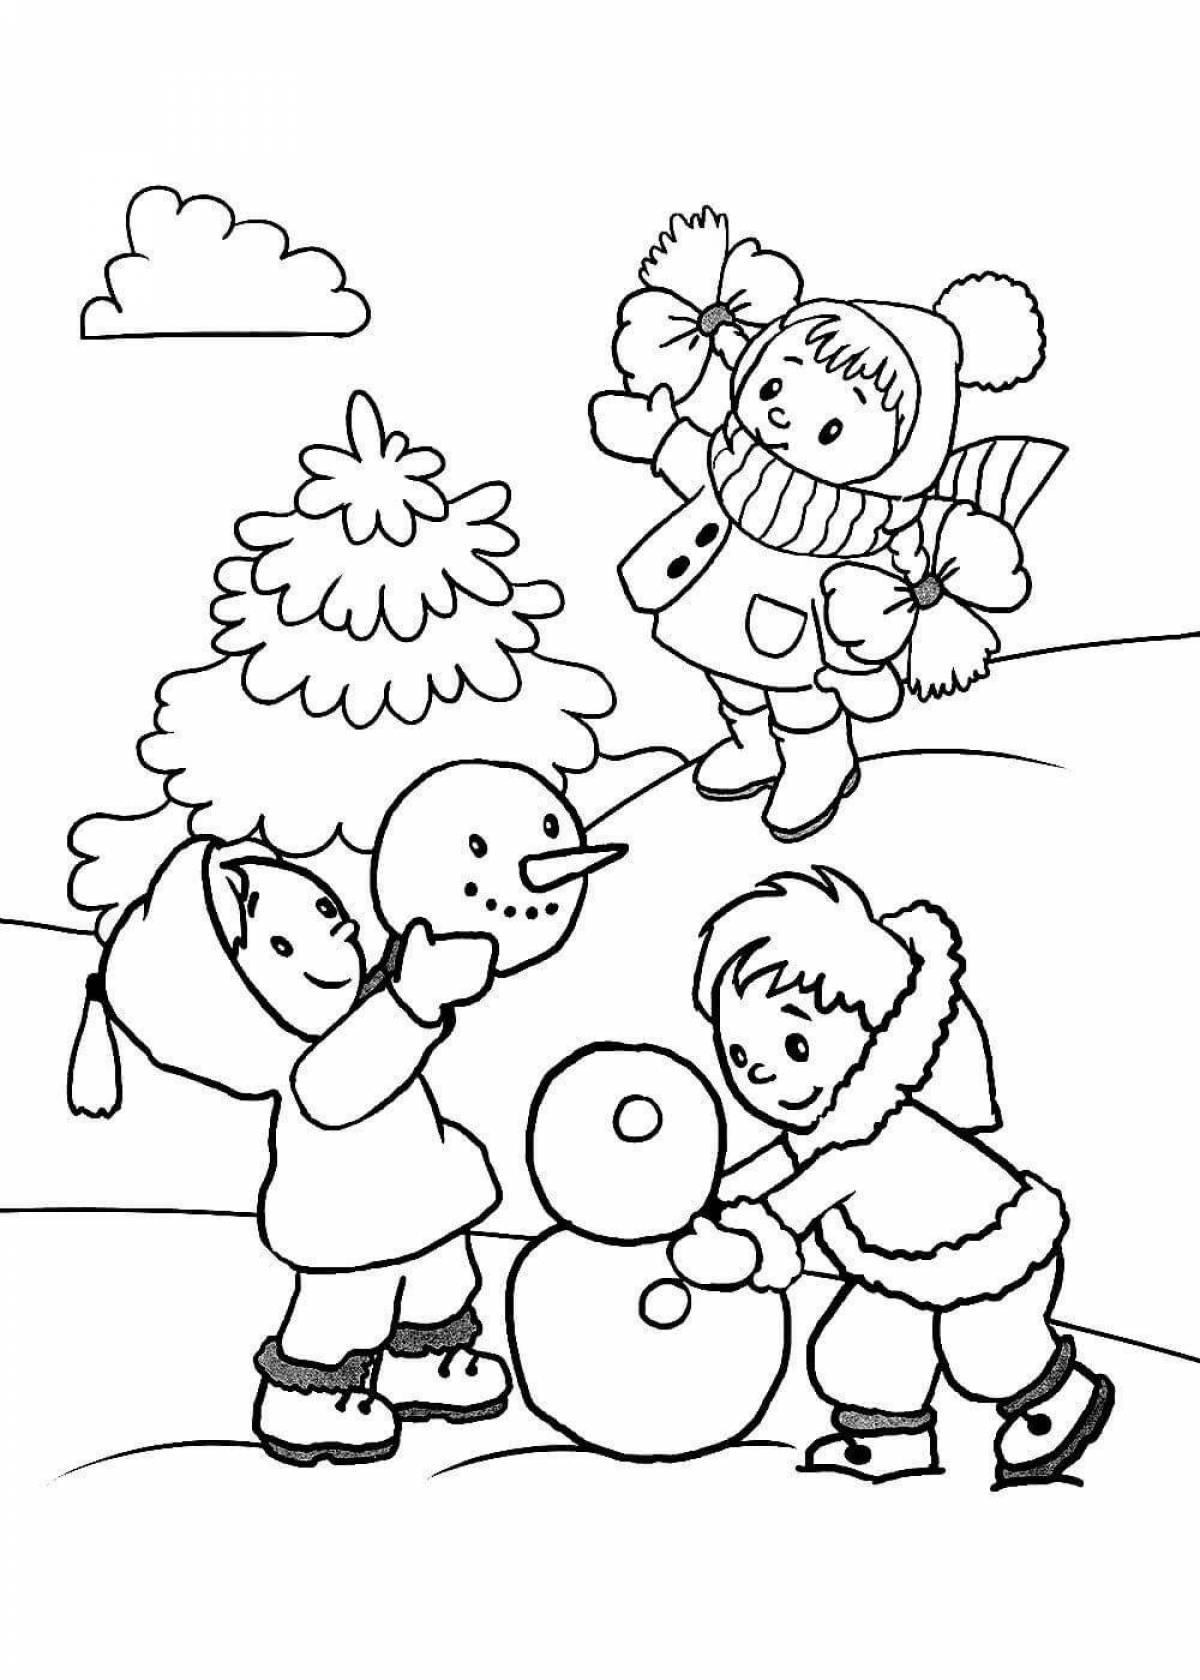 Cute winter coloring book for kids